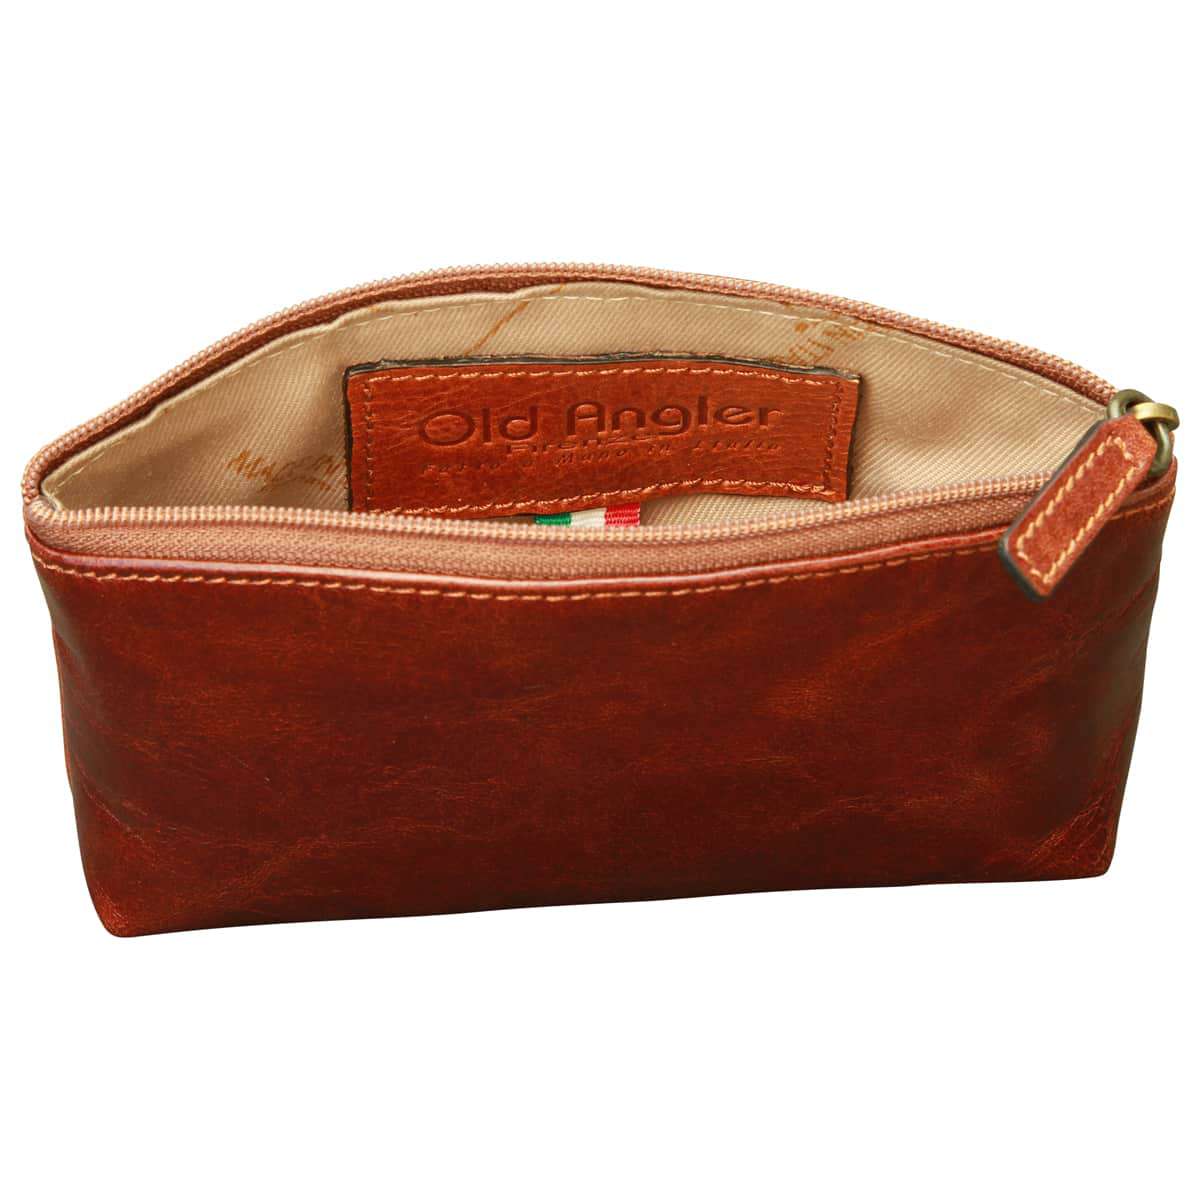 Italian leather beauty case - Brown | 407705MA | EURO | Old Angler Firenze